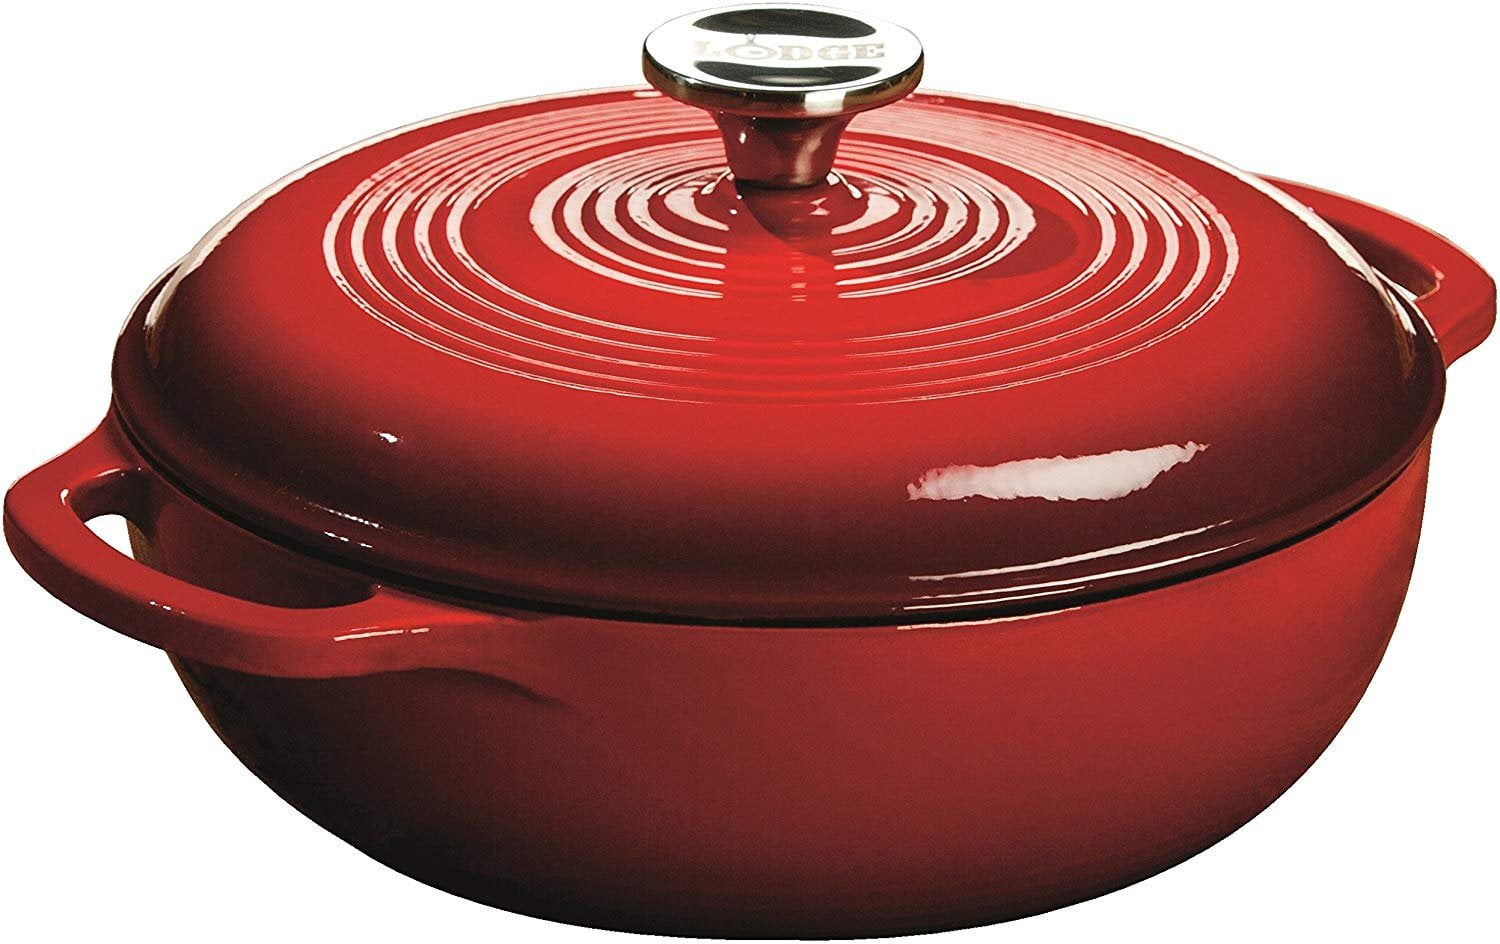 magicplux Dutch Oven Pot with Lid, Enameled Cast Iron Dutch Oven 2 Quart,  Cast Iron Pot for Cooking, Red